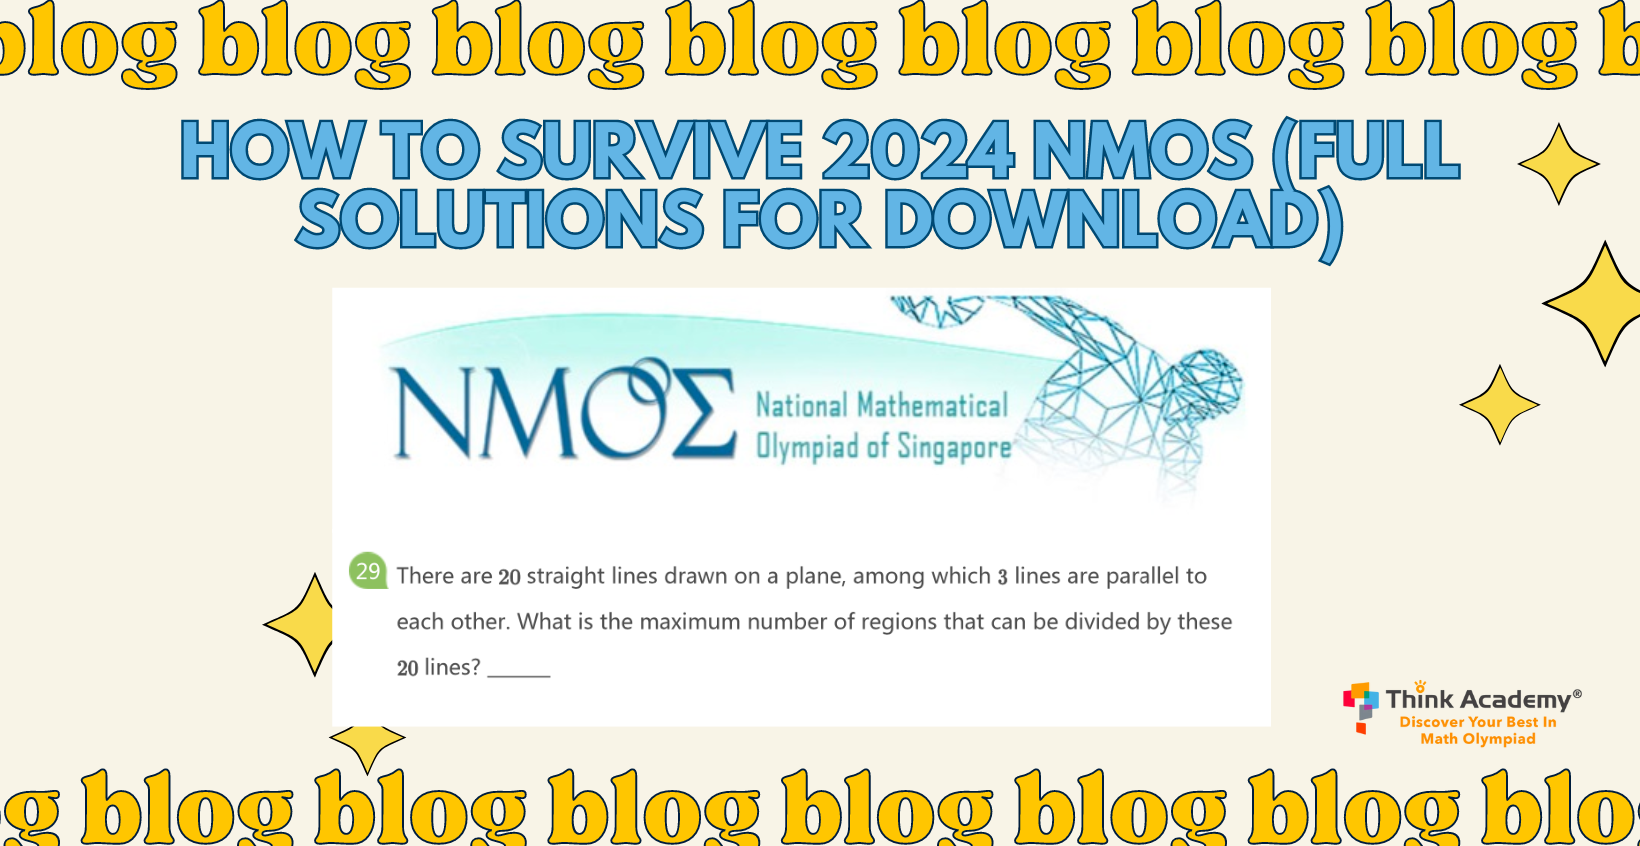 How to survive 2024 NMOS (Full Solutions For Download)